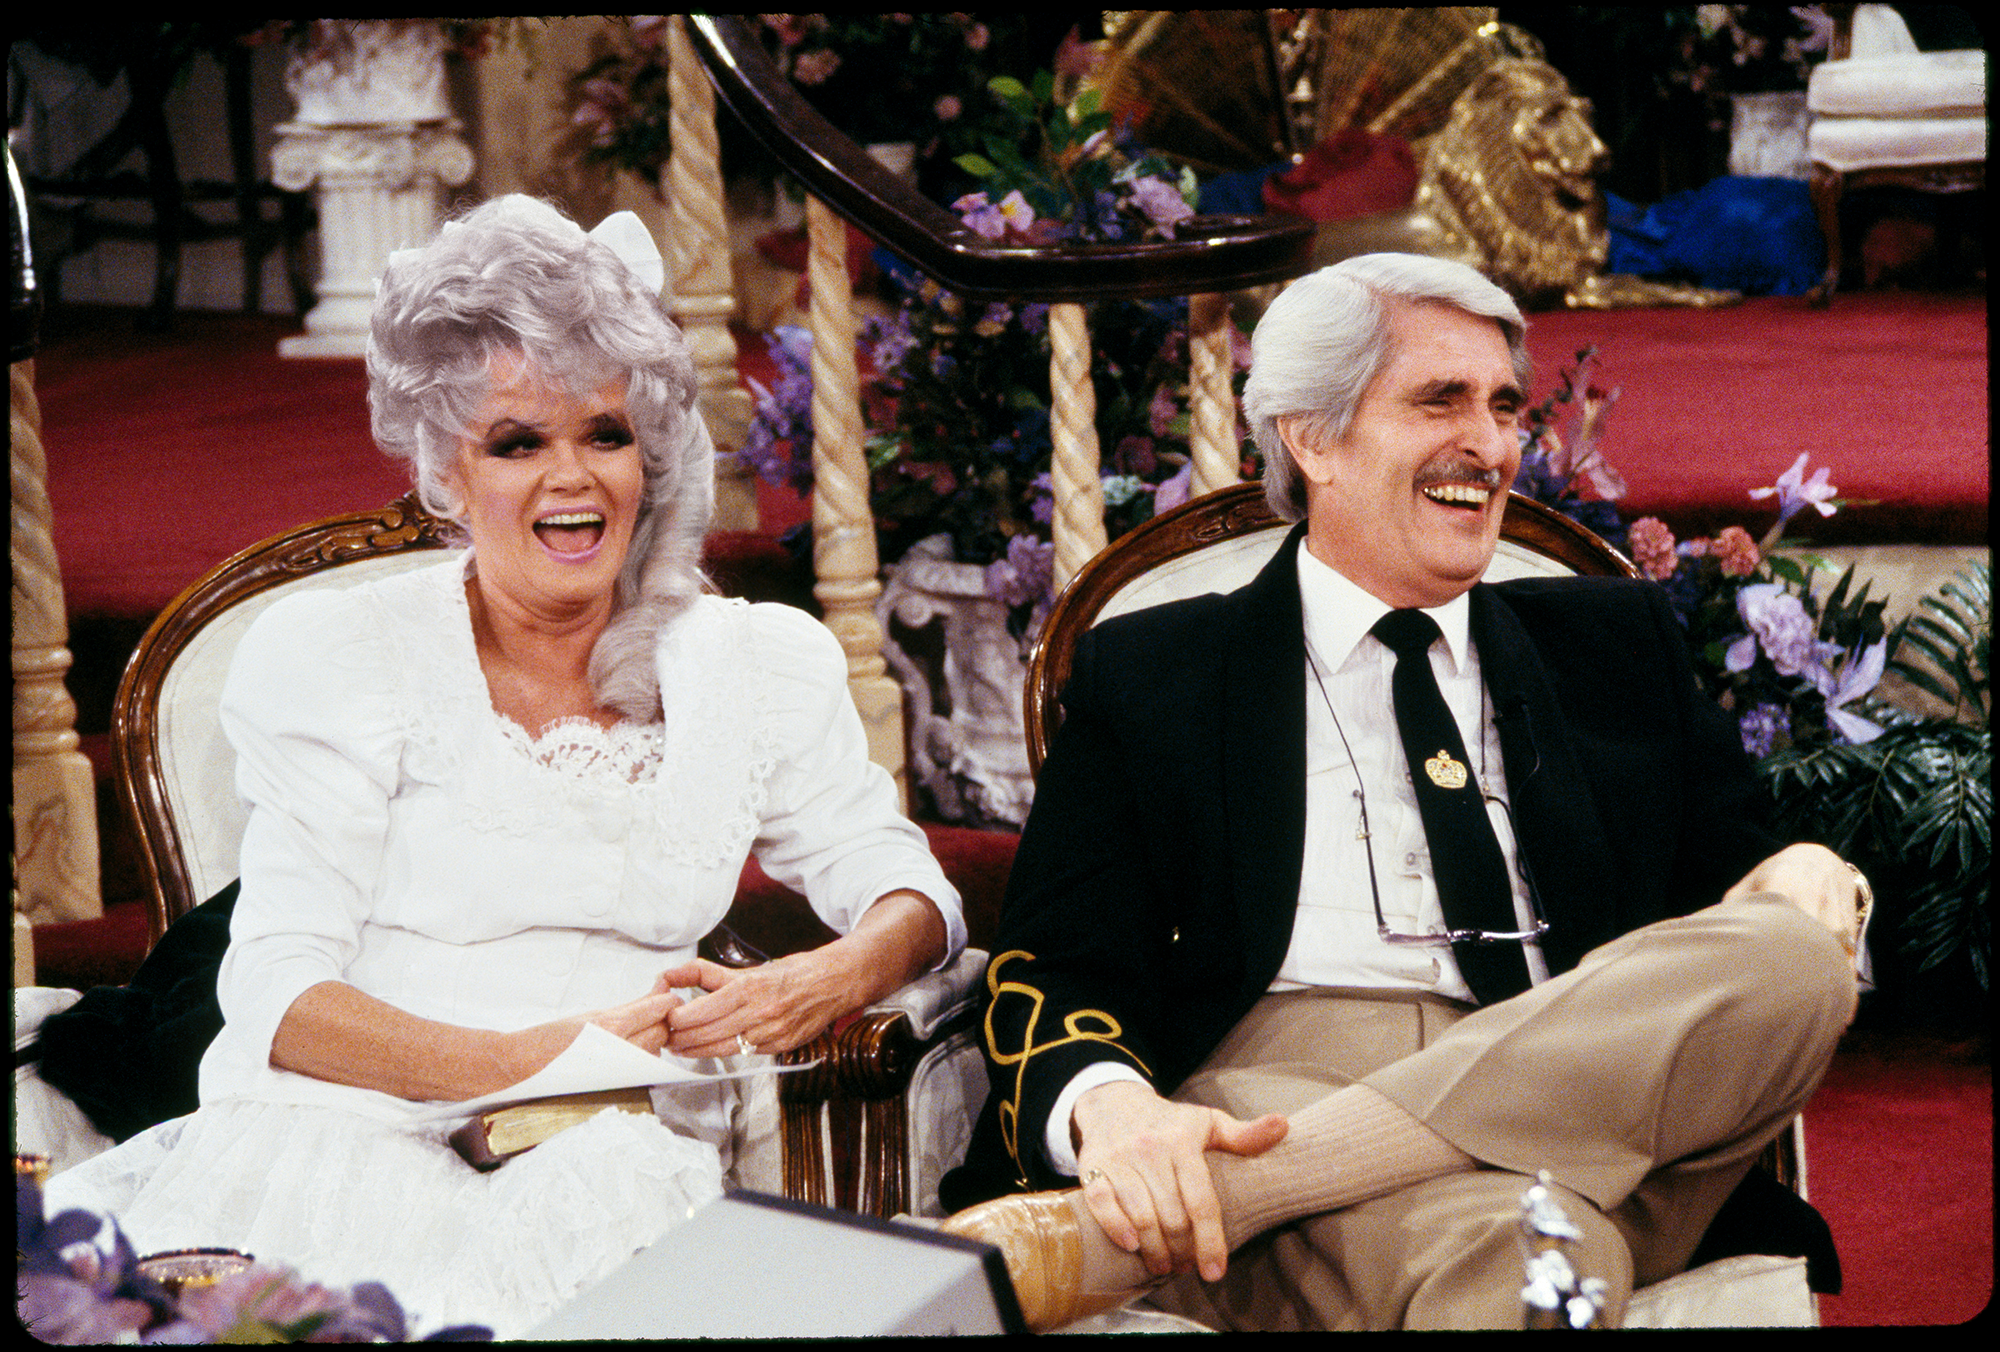 Paul and Jan Crouch Laughing